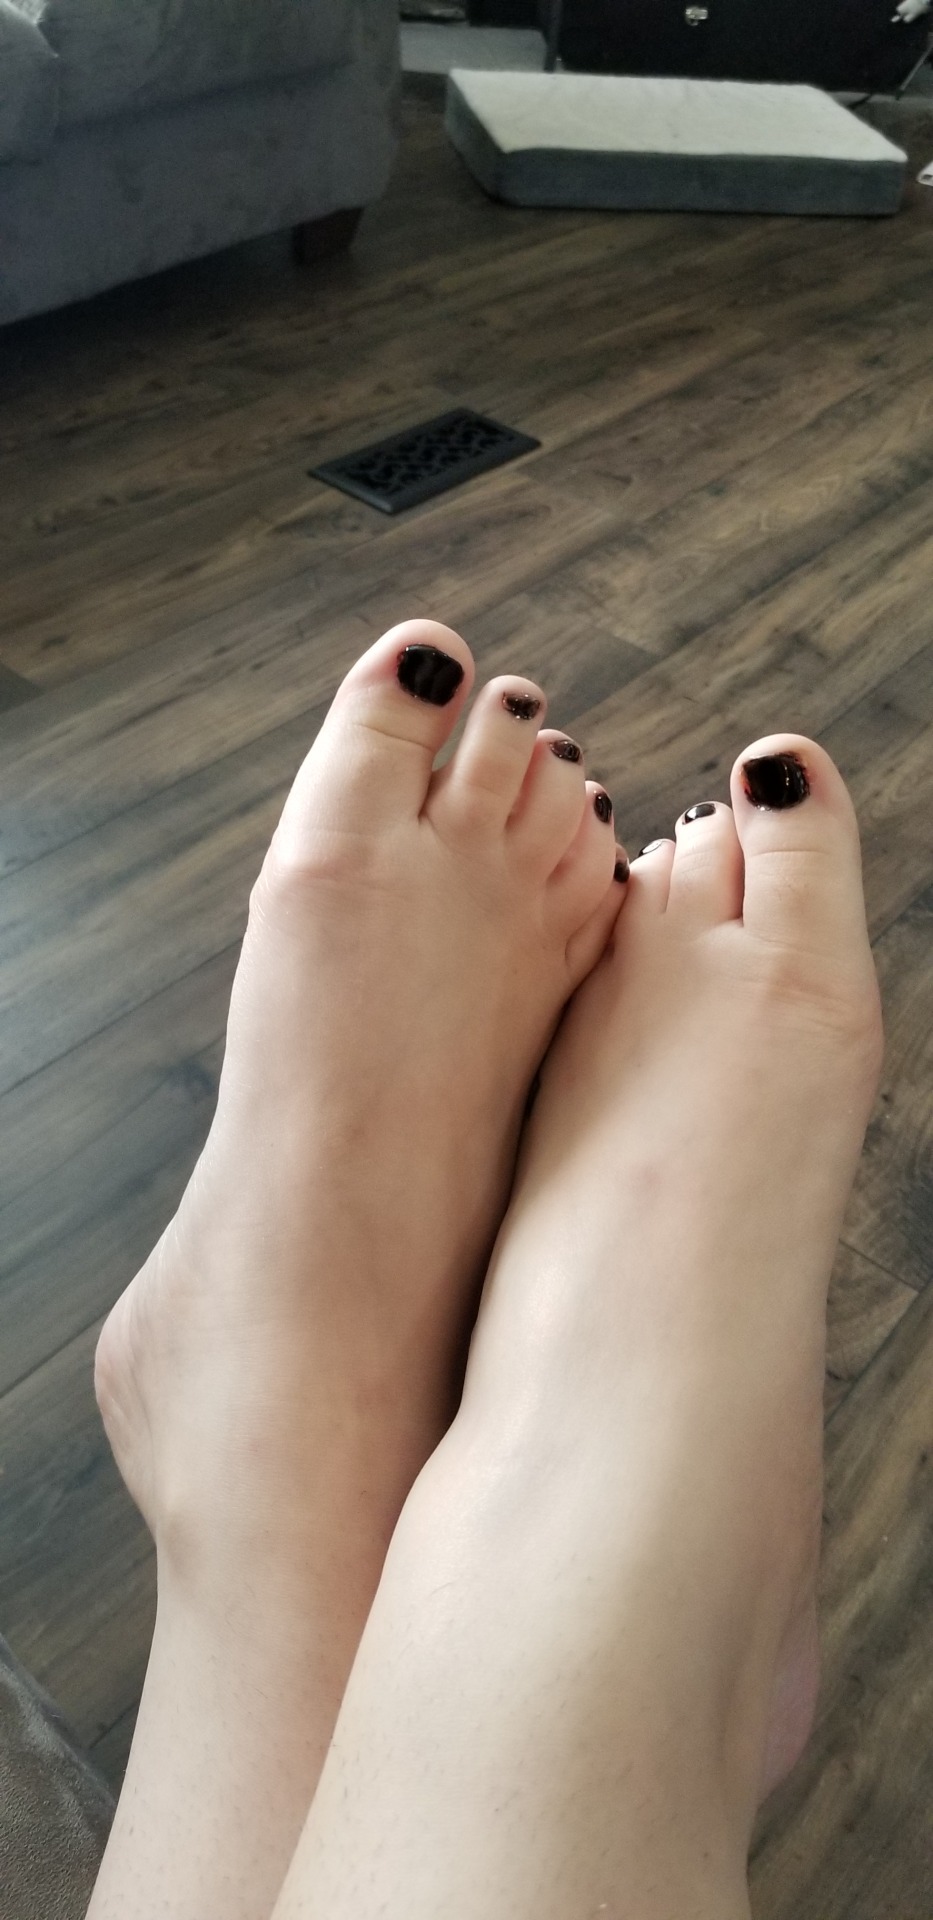 portlypenny-deactivated20230301:The bigger I get, the harder it is to paint my toenails Sexy feet